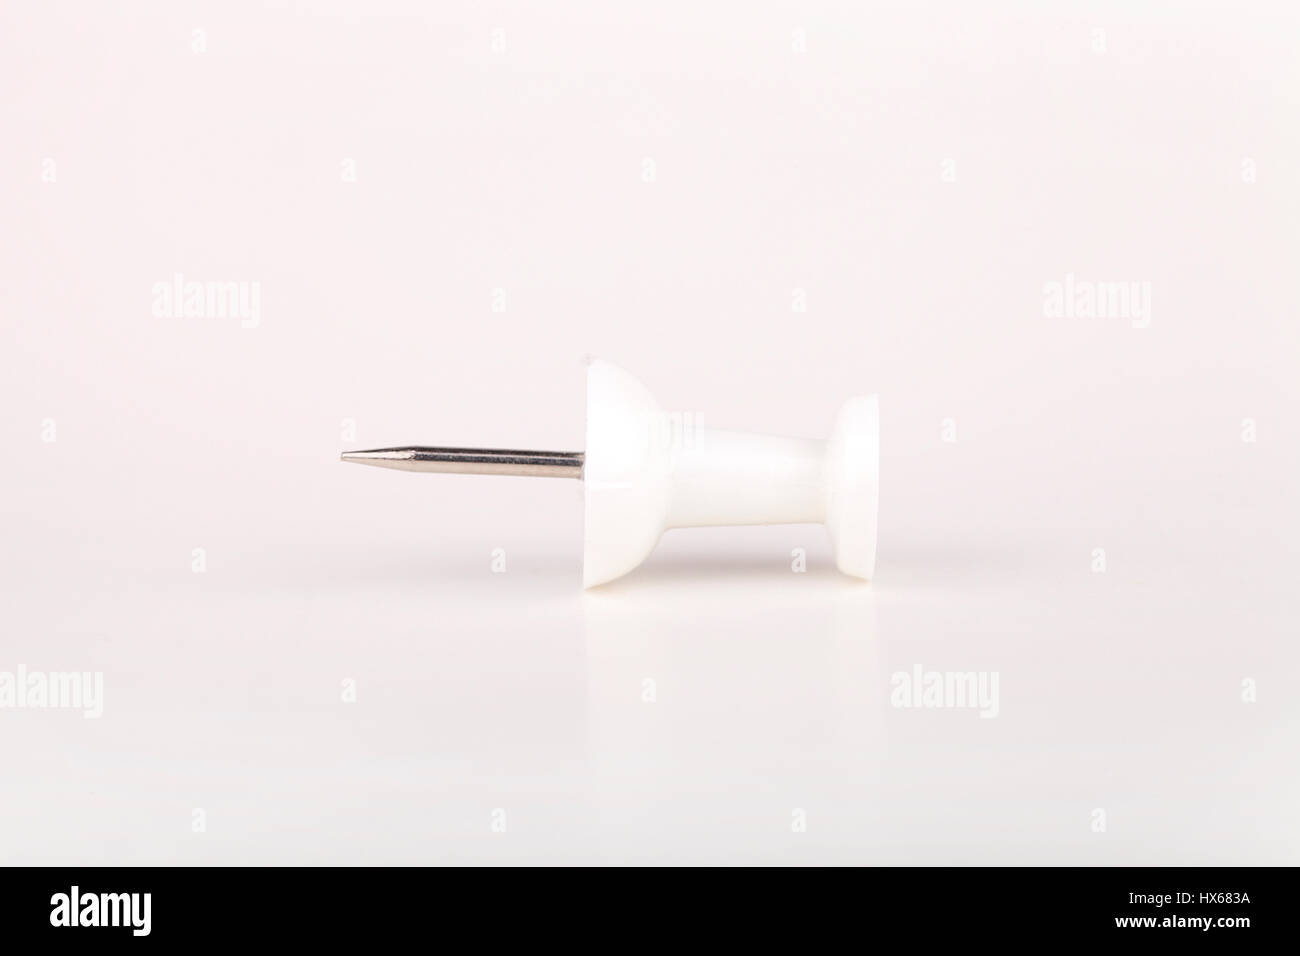 Push Pins with Long Shadow on Paper Background, Office Abstract Concept  Stock Photo - Image of direction, pinned: 229709976